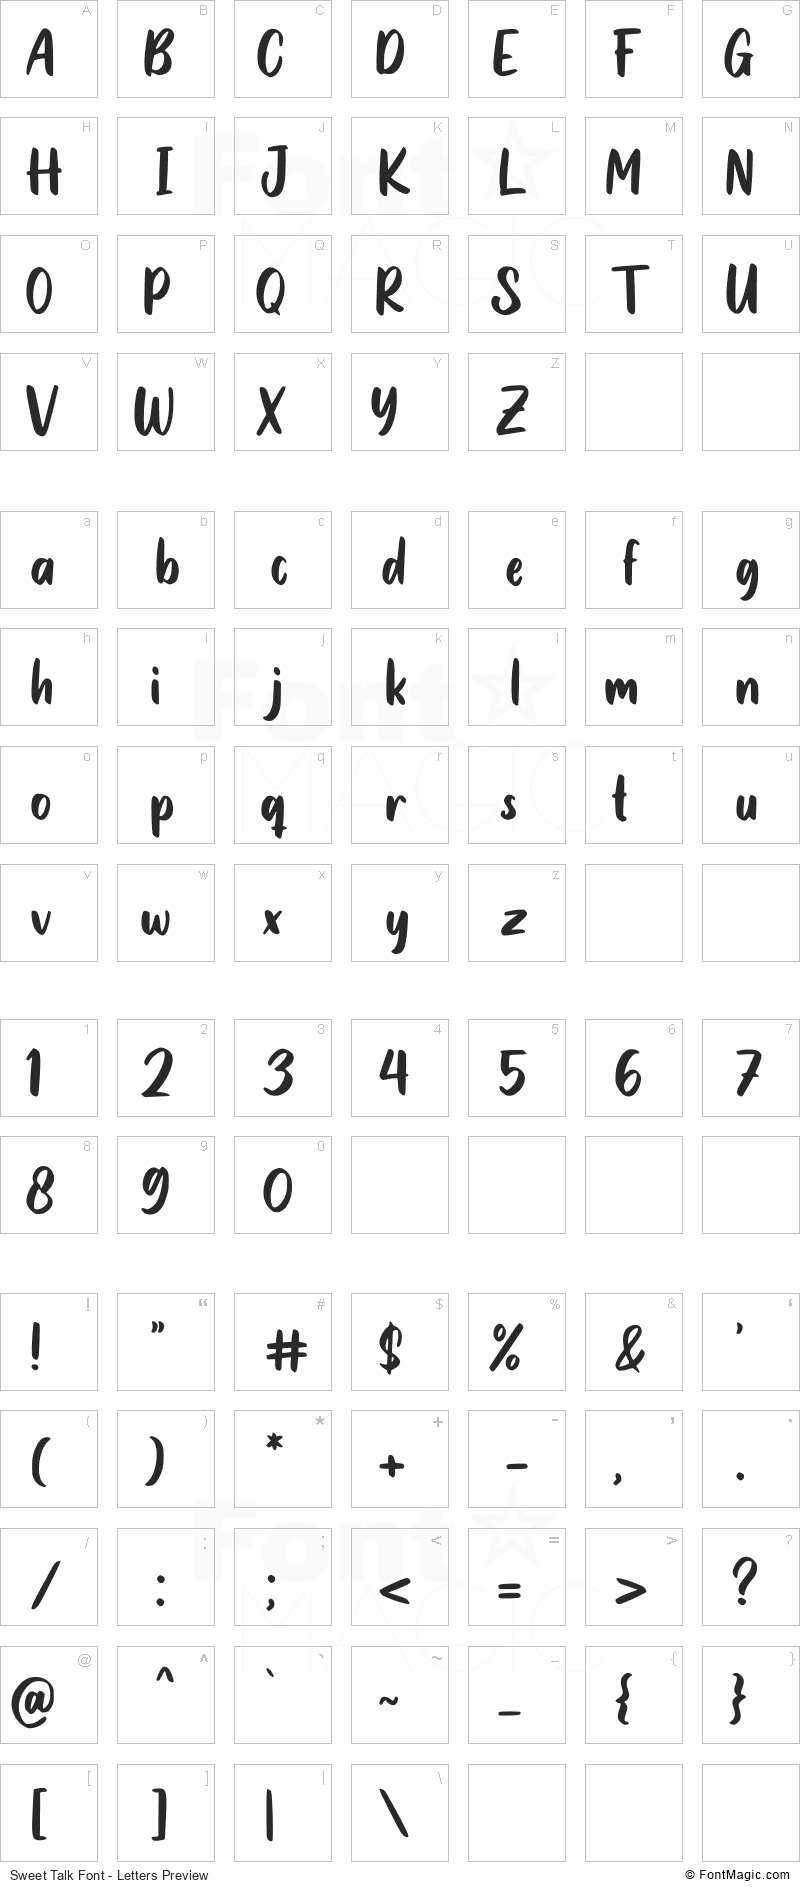 Sweet Talk Font - All Latters Preview Chart